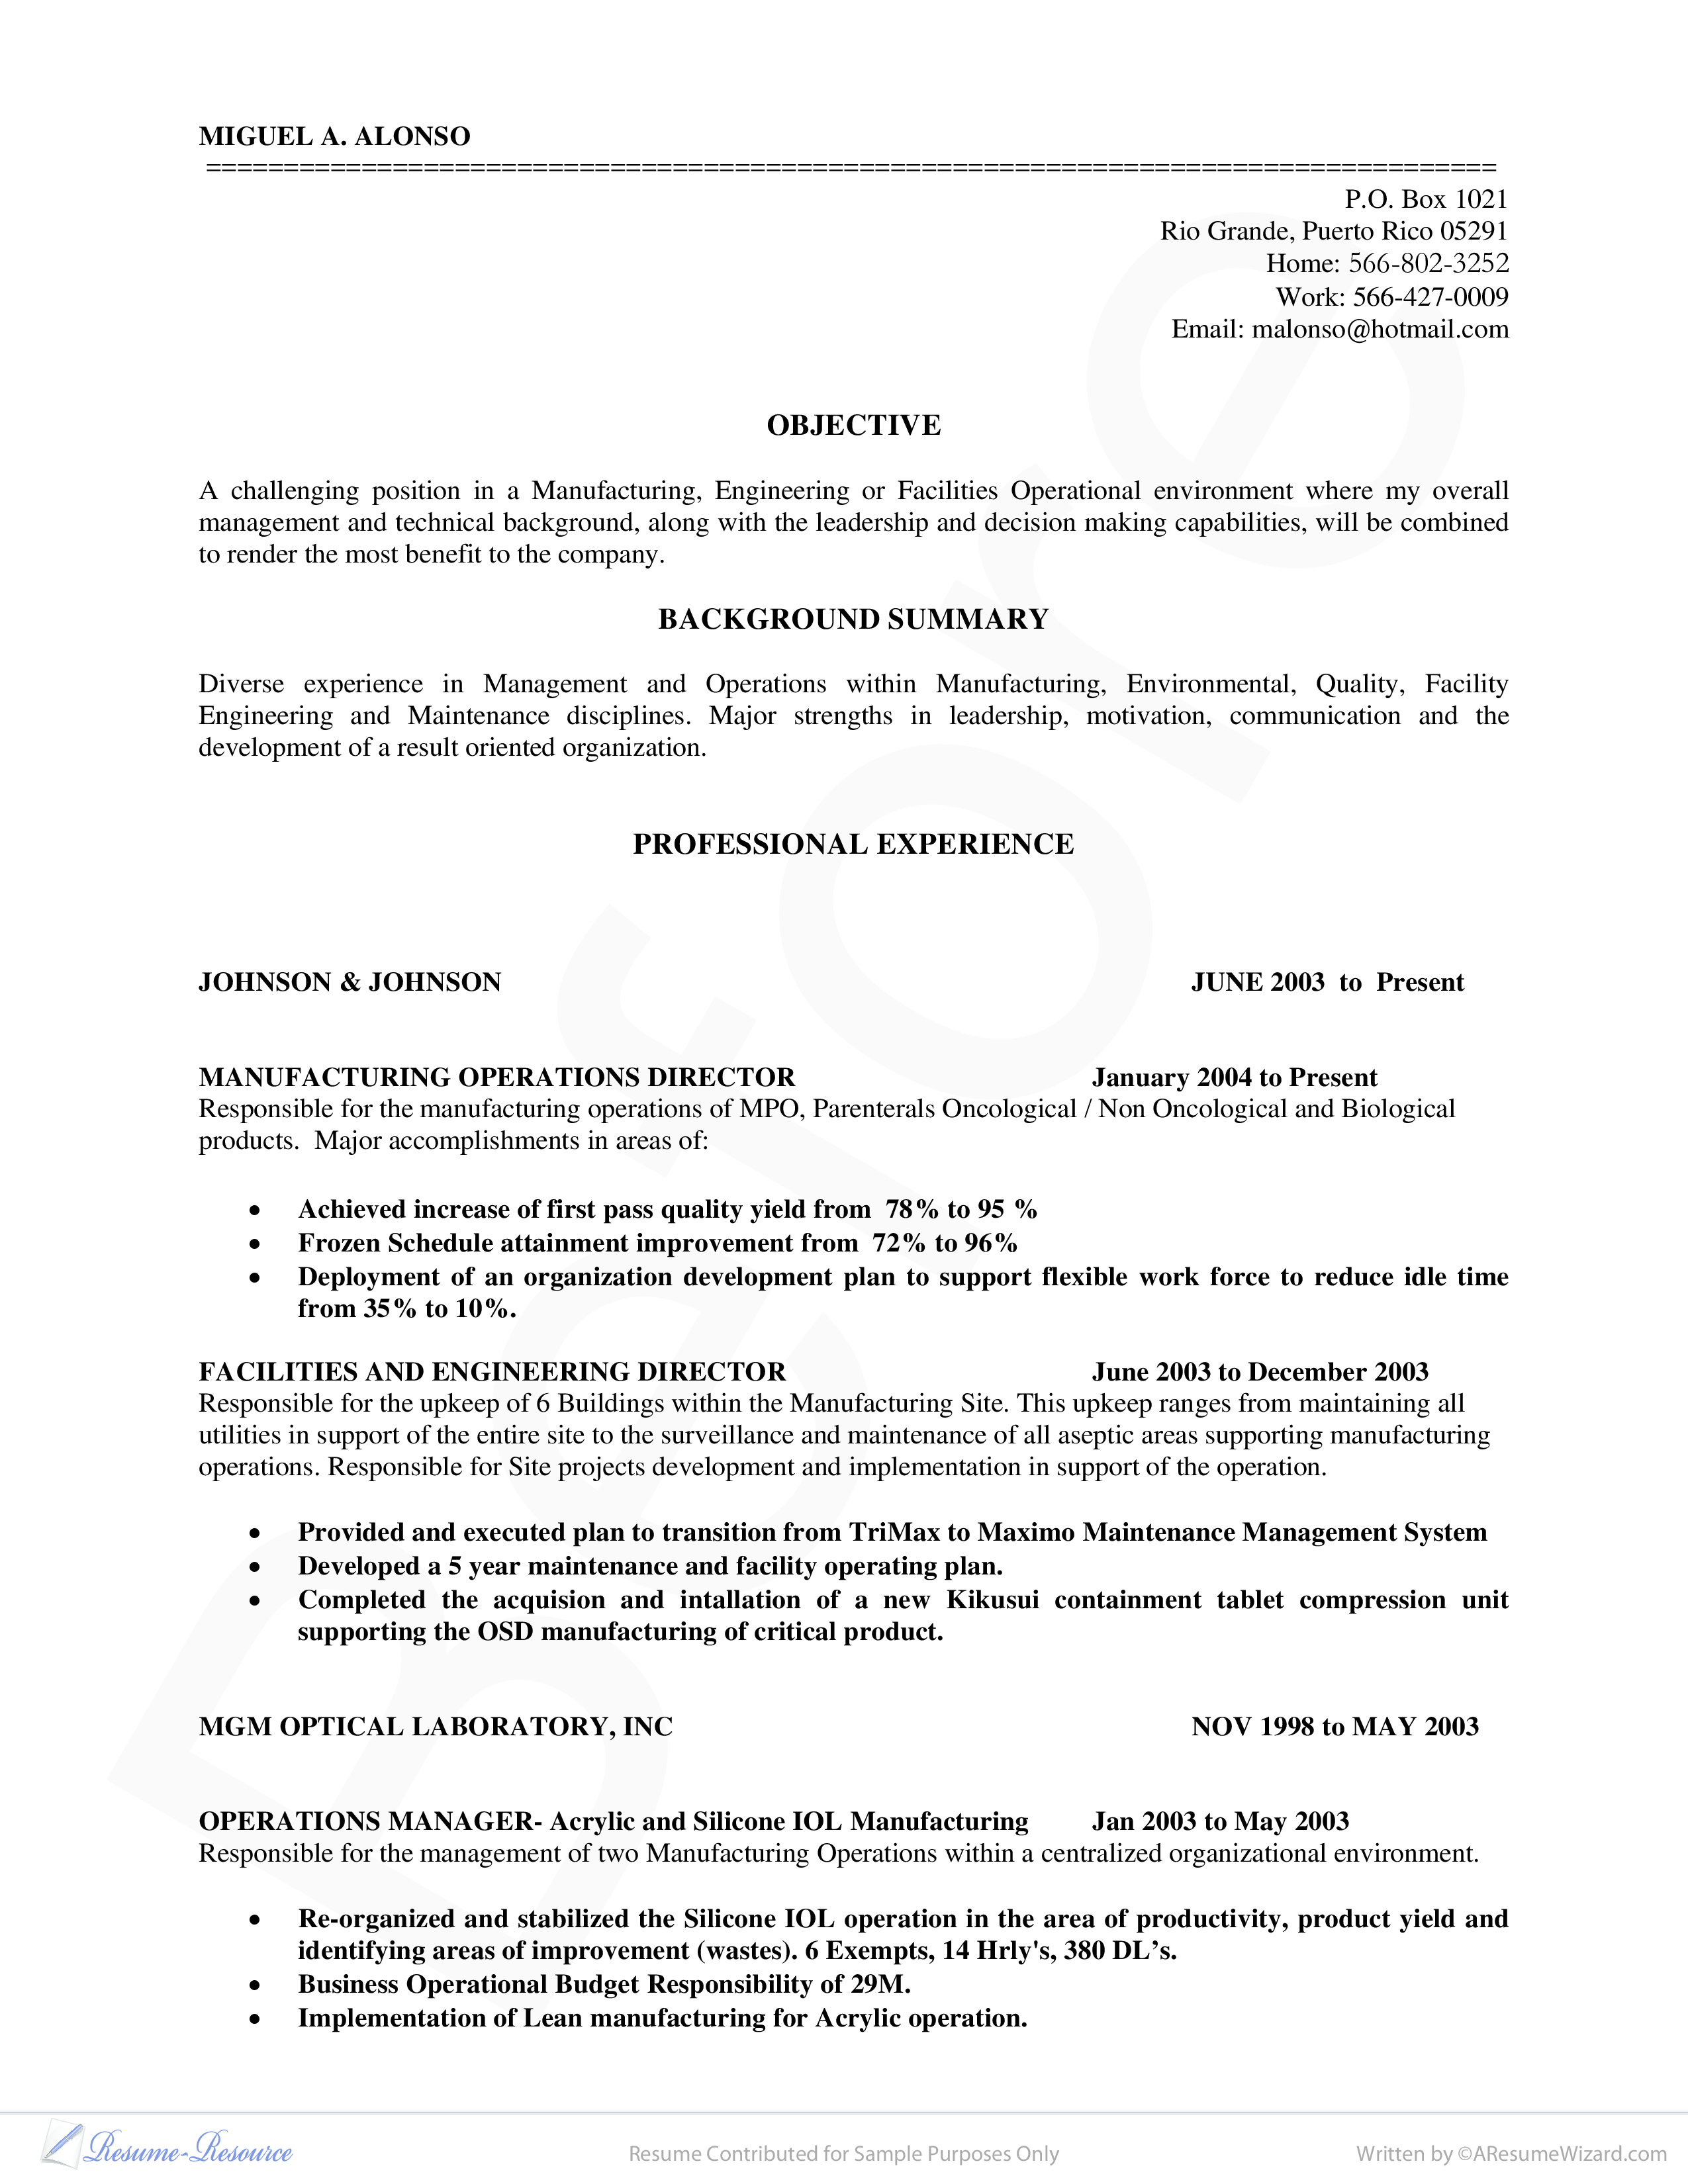 manufacturing manager resume - before and after plantilla imagen principal